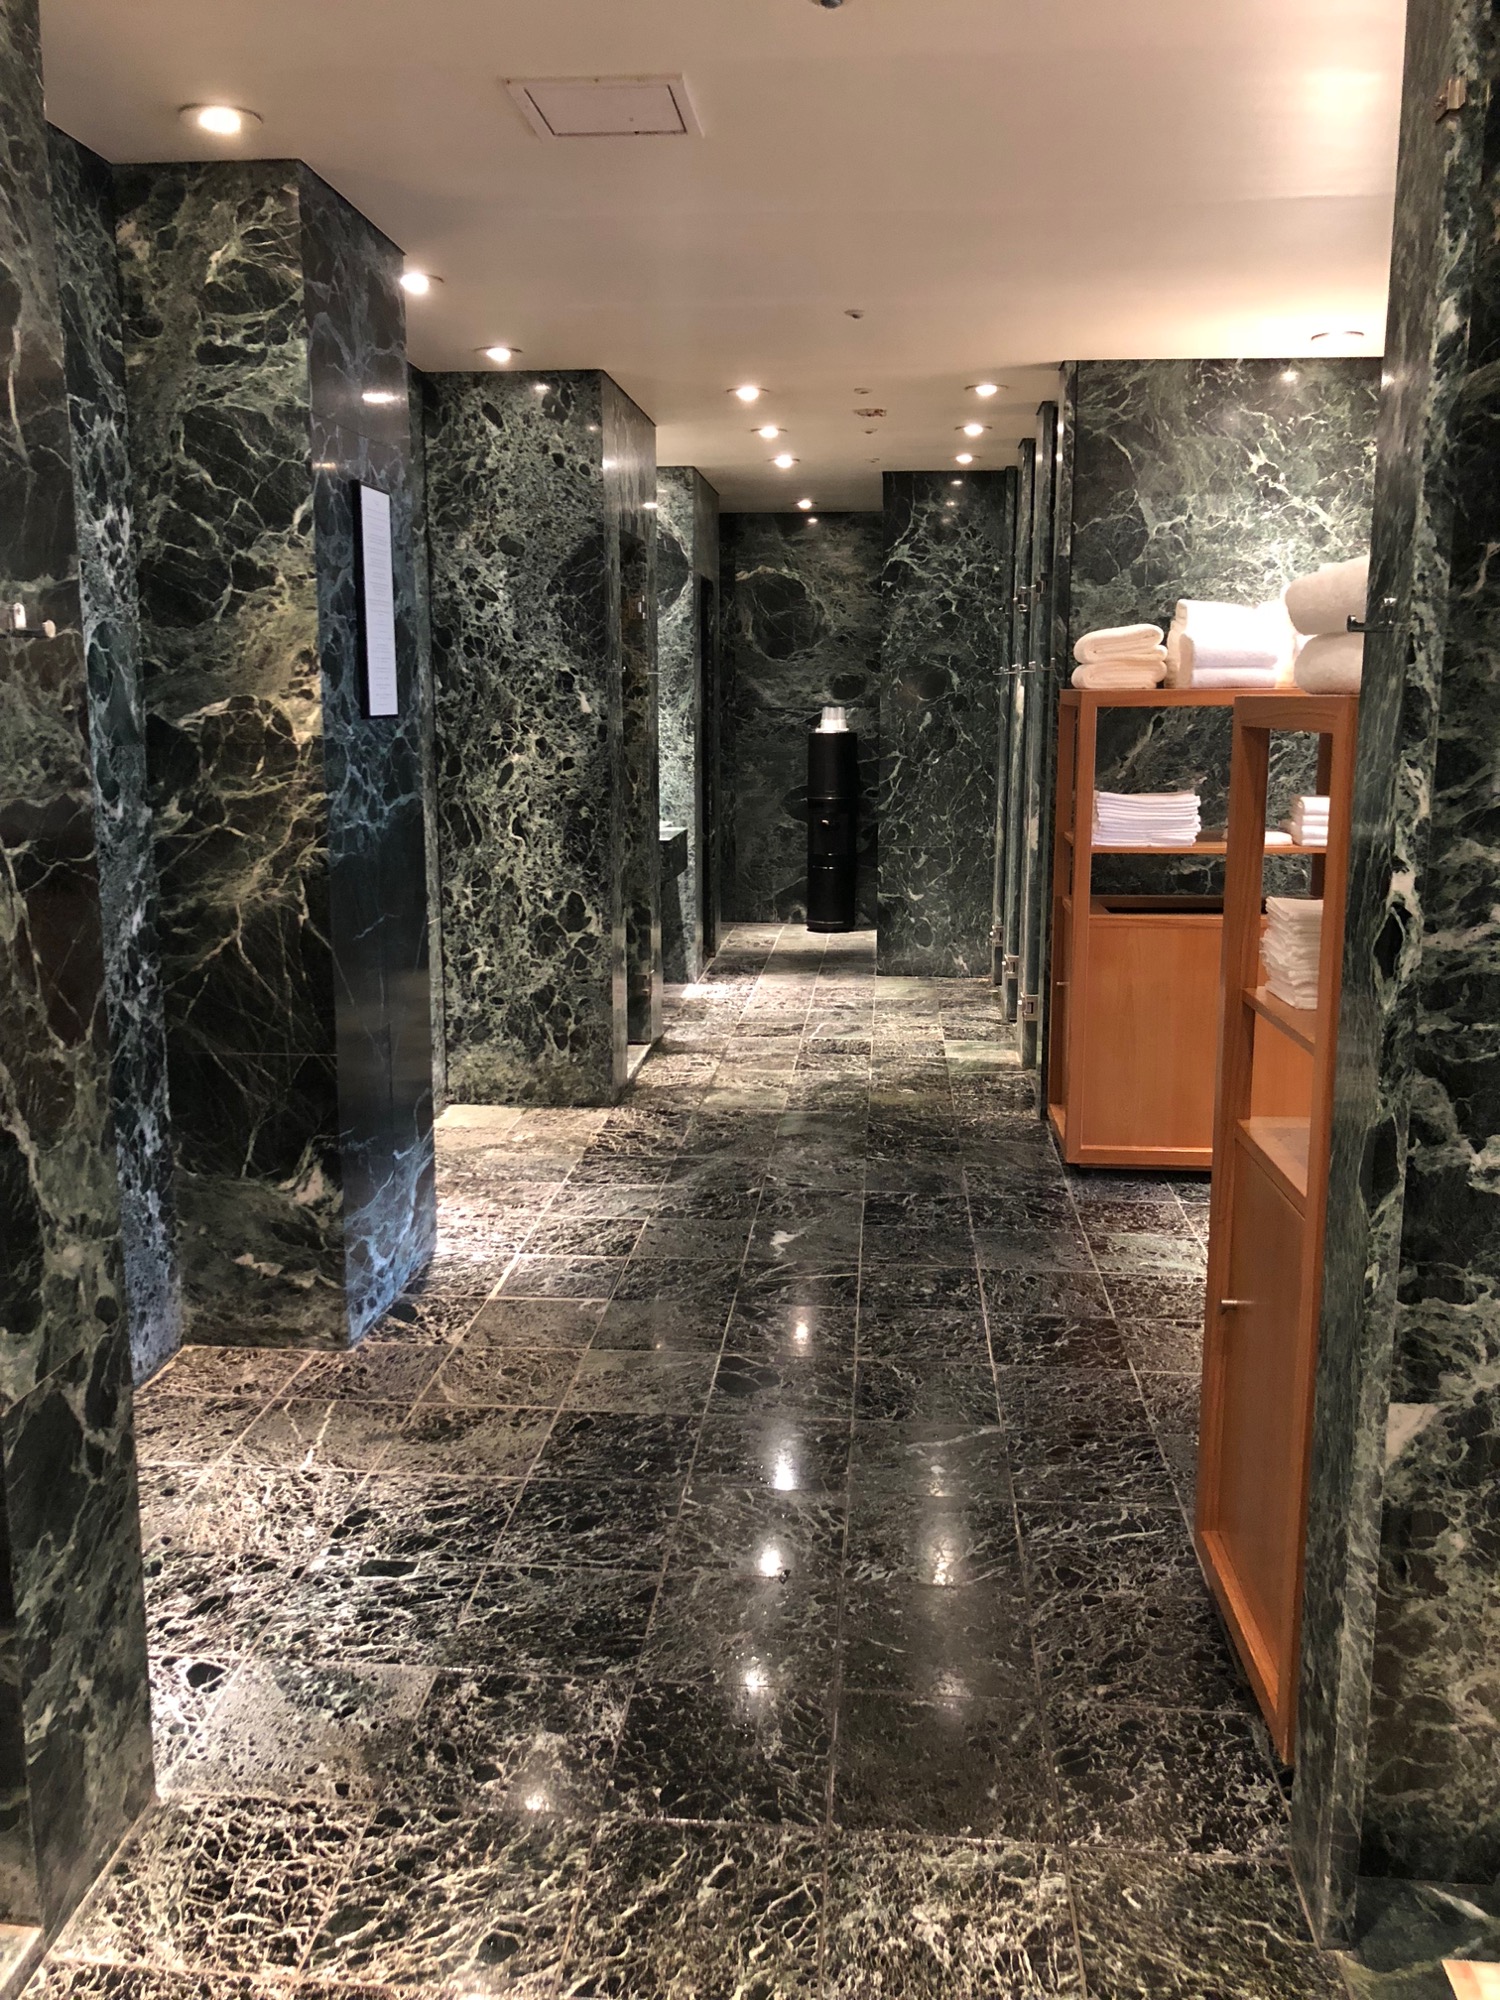 a bathroom with marble walls and shelves